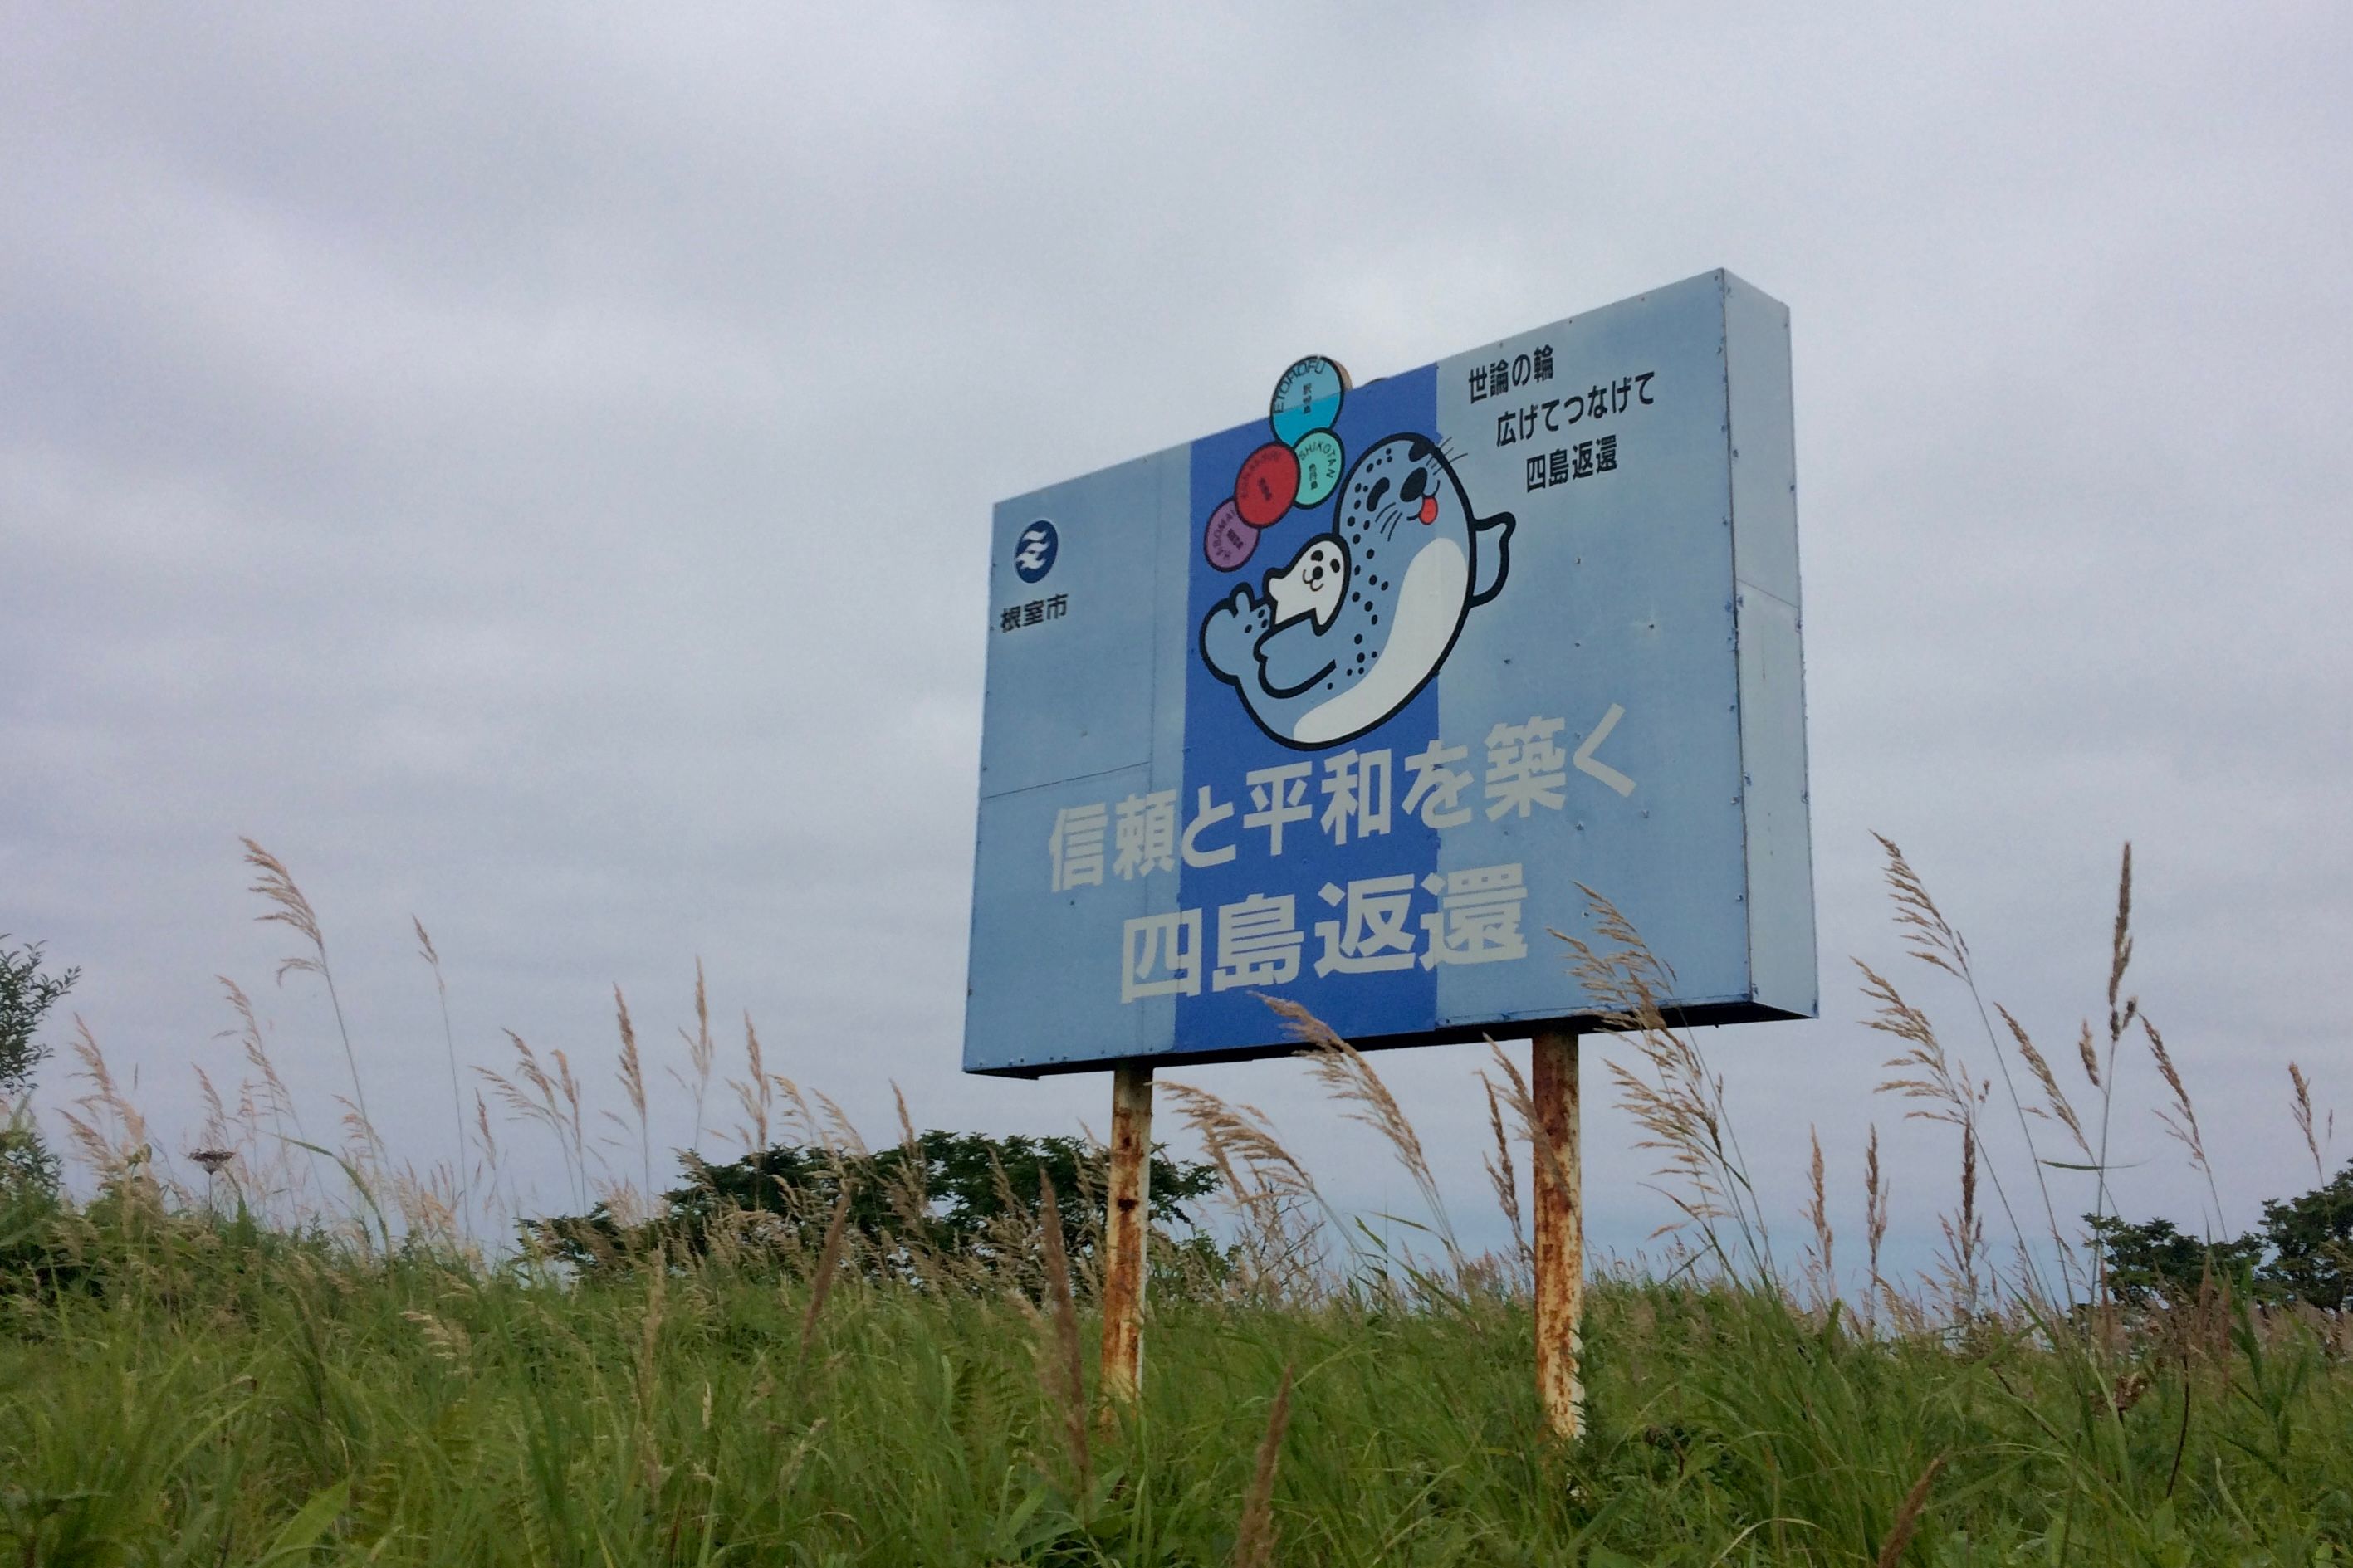 A sign with a mother and baby seal describe the Kuril Islands dispute from the Japanese perspective.